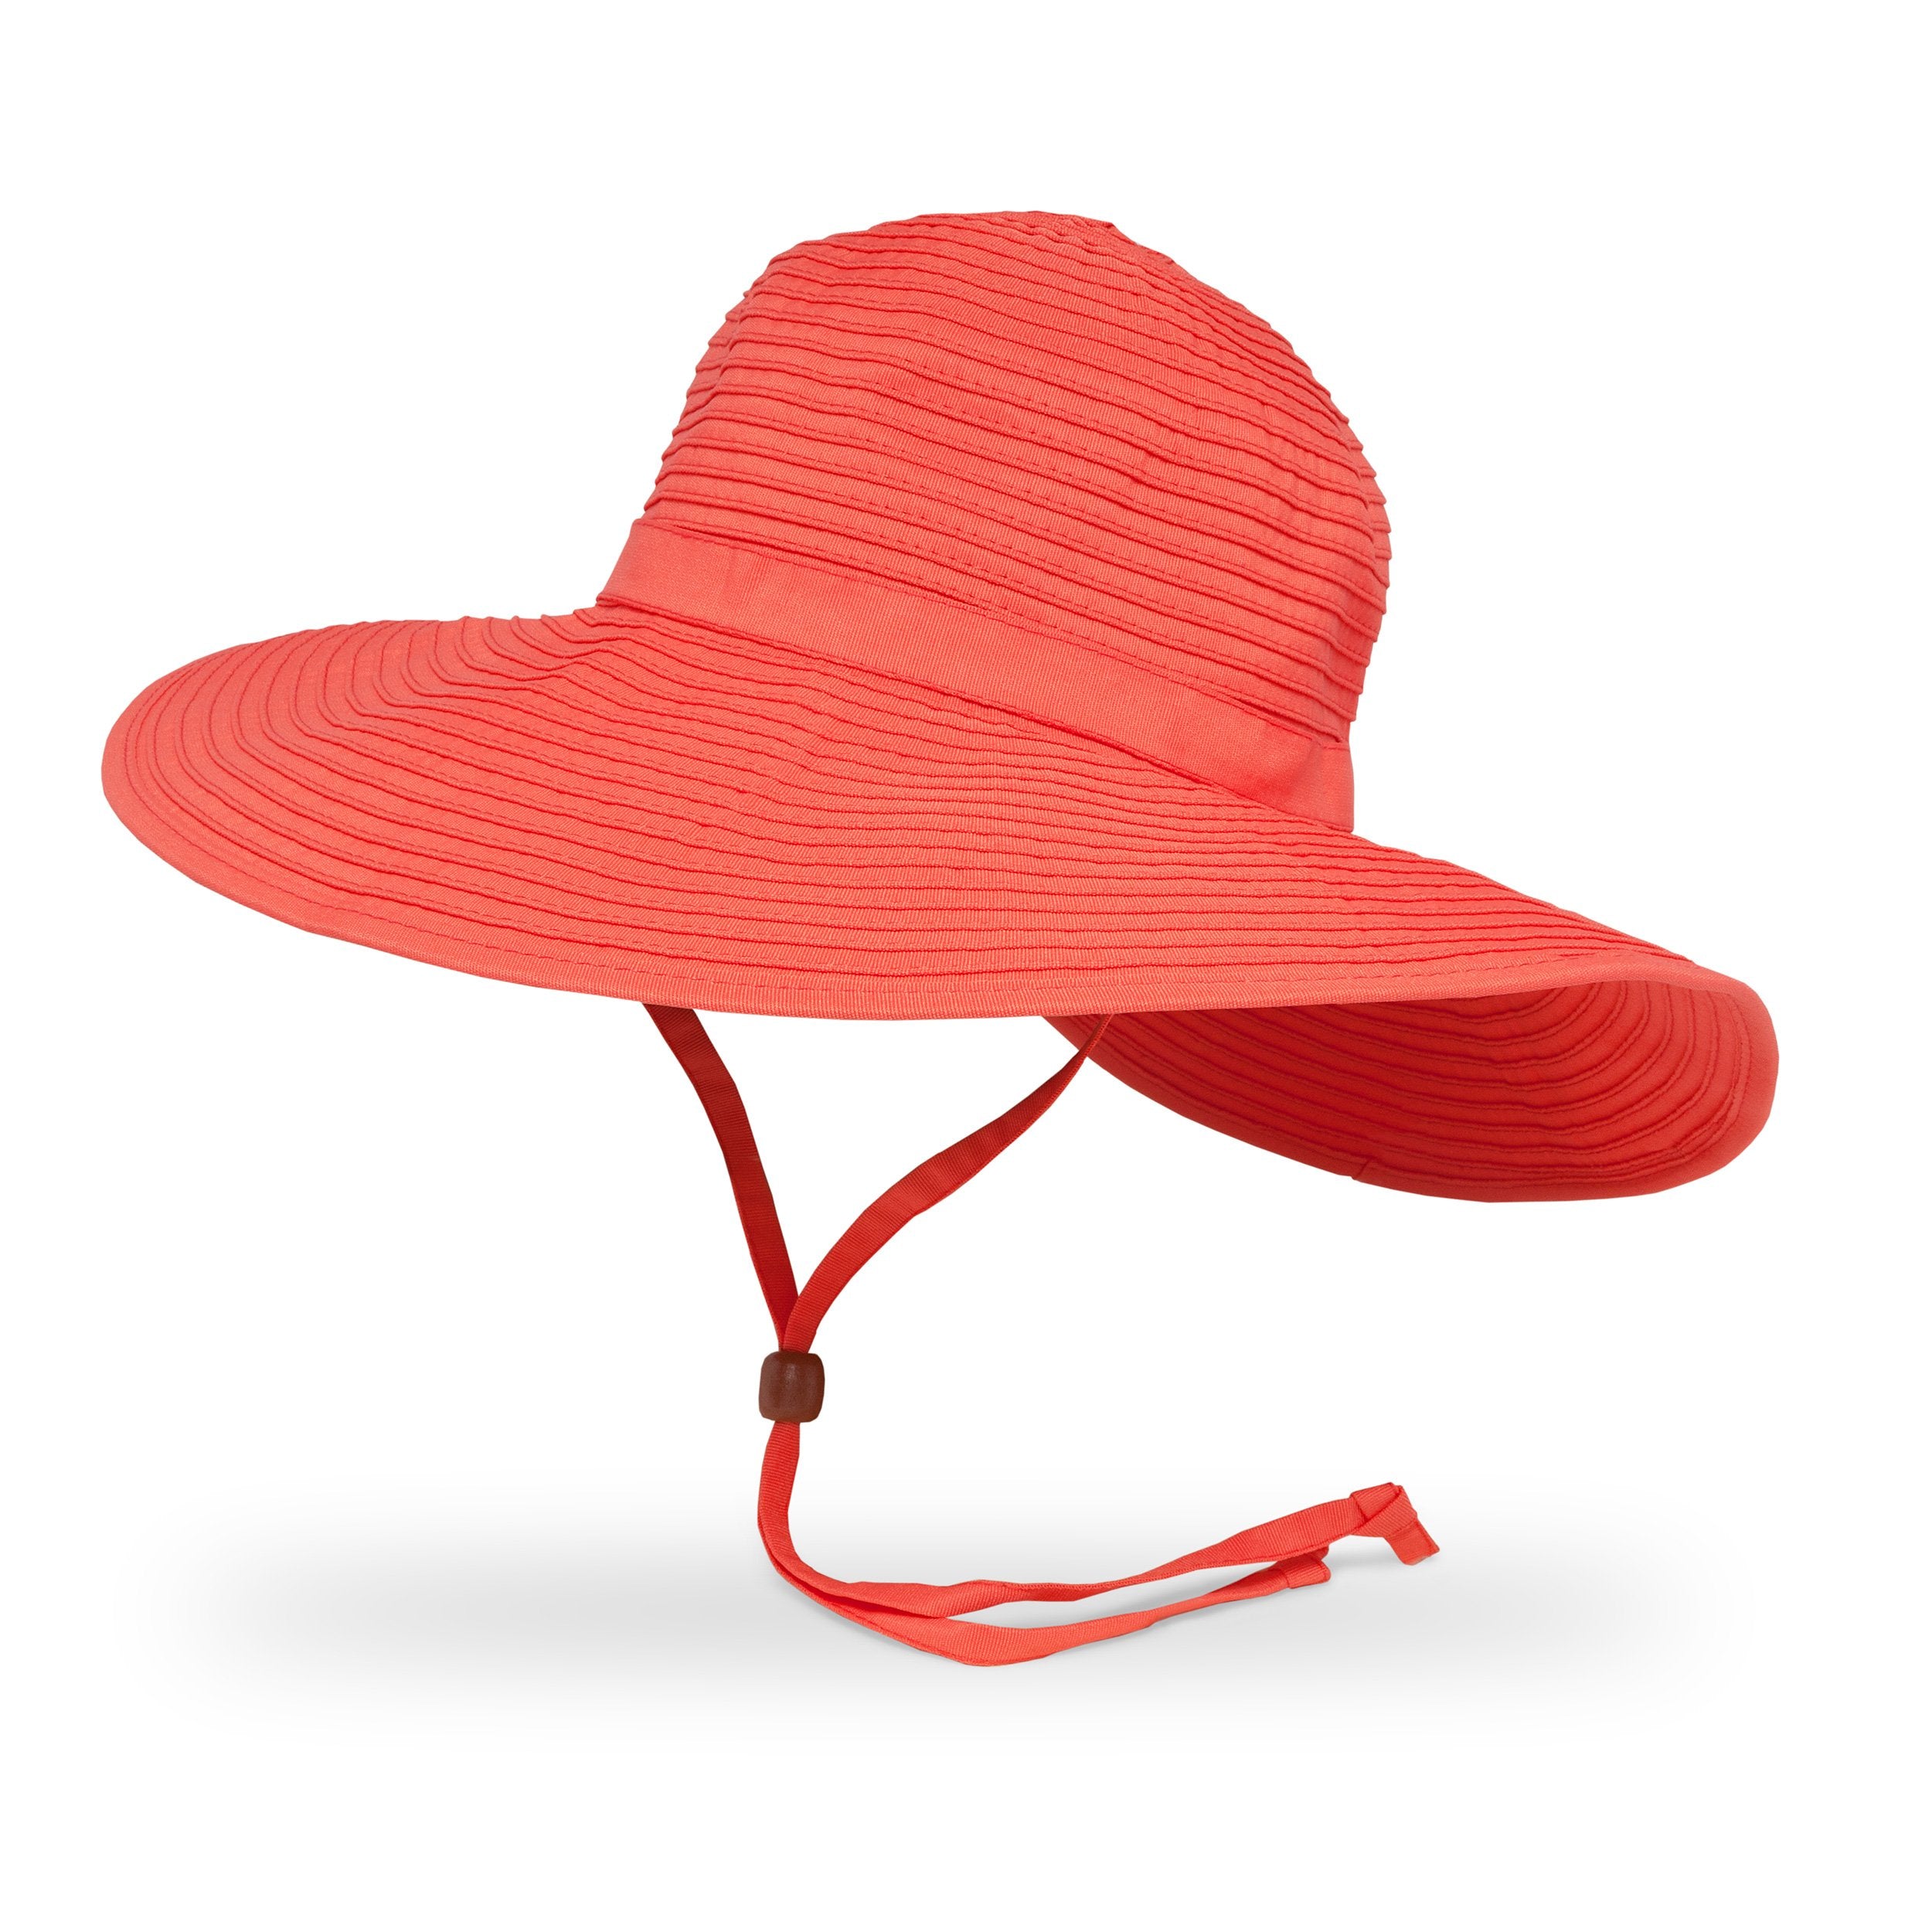 2020 New Dot Mesh Sun Hat With Wide Brim For Women Elegant Boater Hat Women  For Church, Beach And Summer Big Brimming Design J230301 From Wangcai04,  $9.01